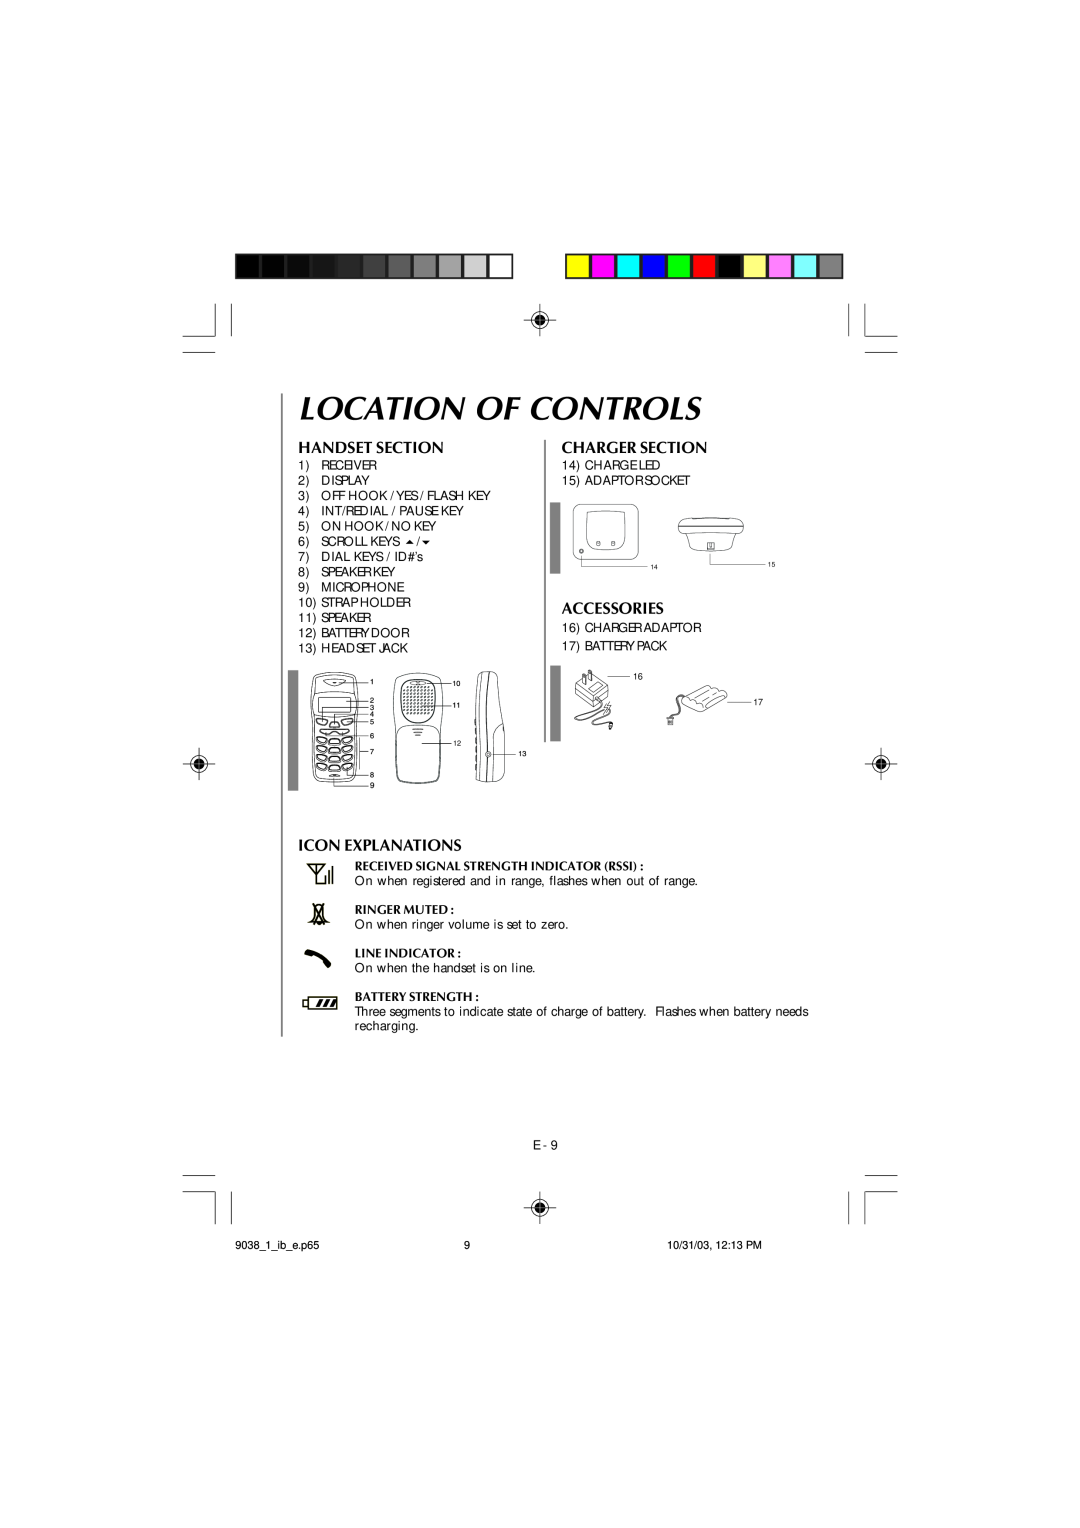 Audiovox TL1102, 4GHz owner manual Location Of Controls, Handset Section, Charger Section, Accessories, Icon Explanations 